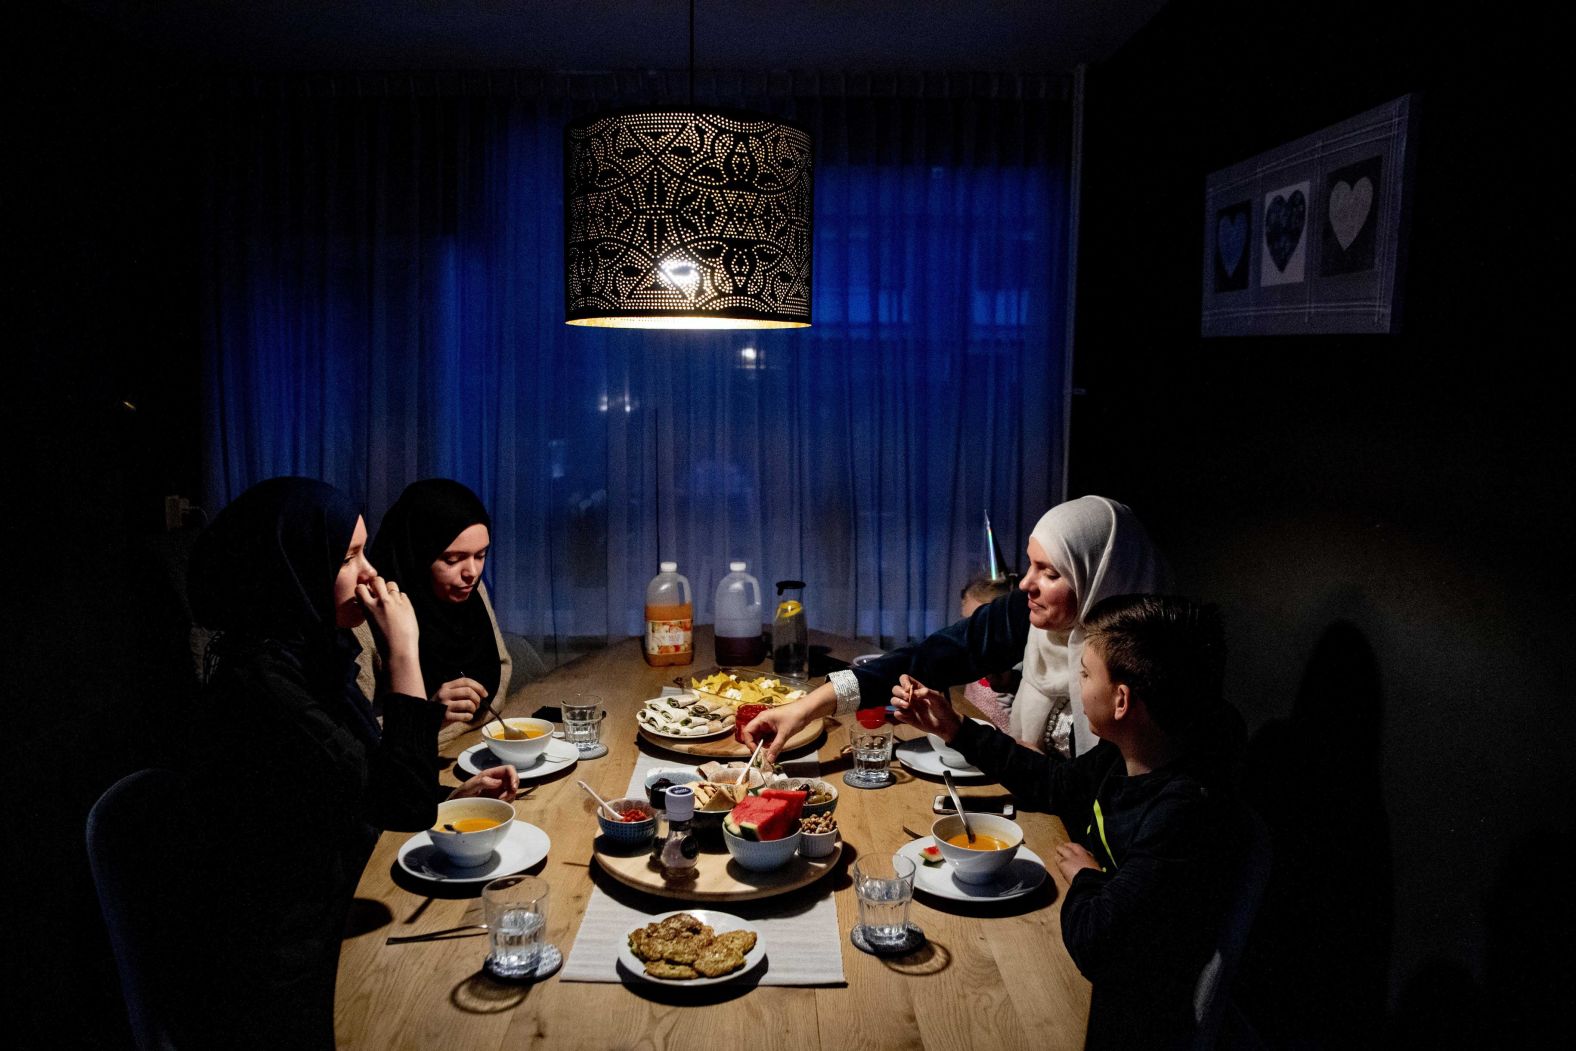 A Dutch Muslim family gathers during the Iftar, the meal after sunset during the Islamic month of fasting Ramadan in Rotterdam, The Netherlands.